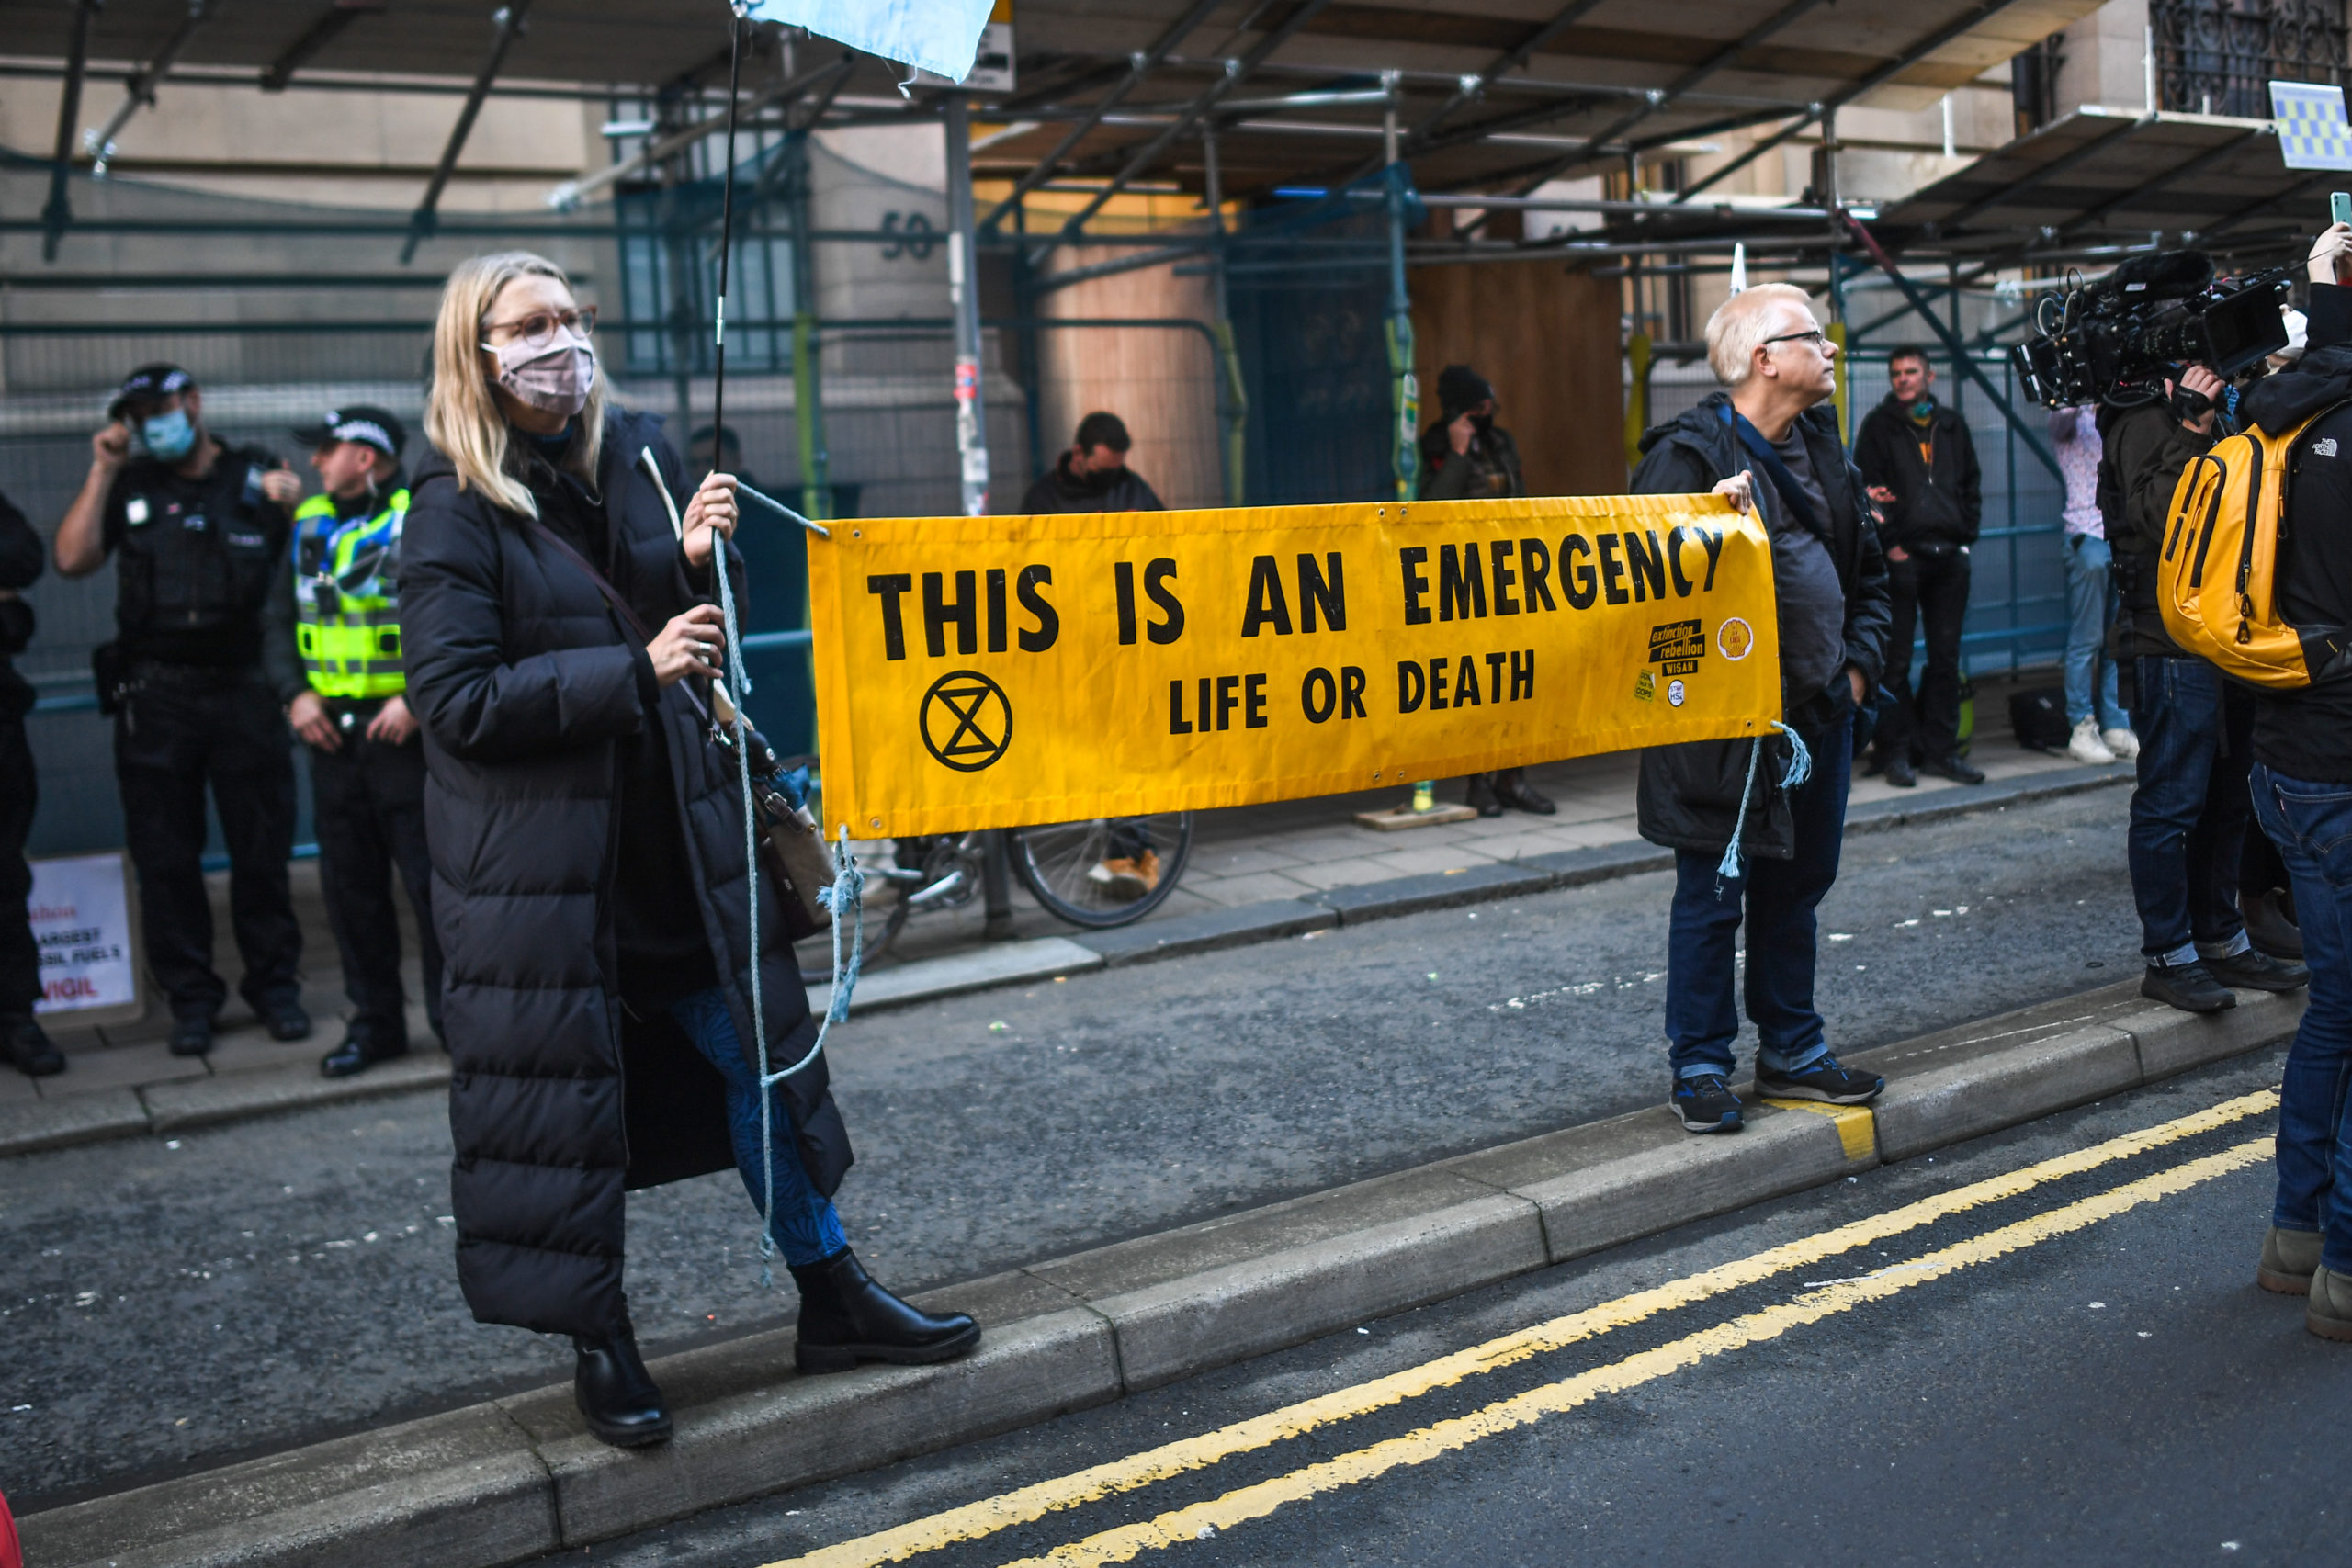 Climate protesters are seen on Nov. 10 in Glasgow, United Kingdom. (Peter Summers/Getty Images)